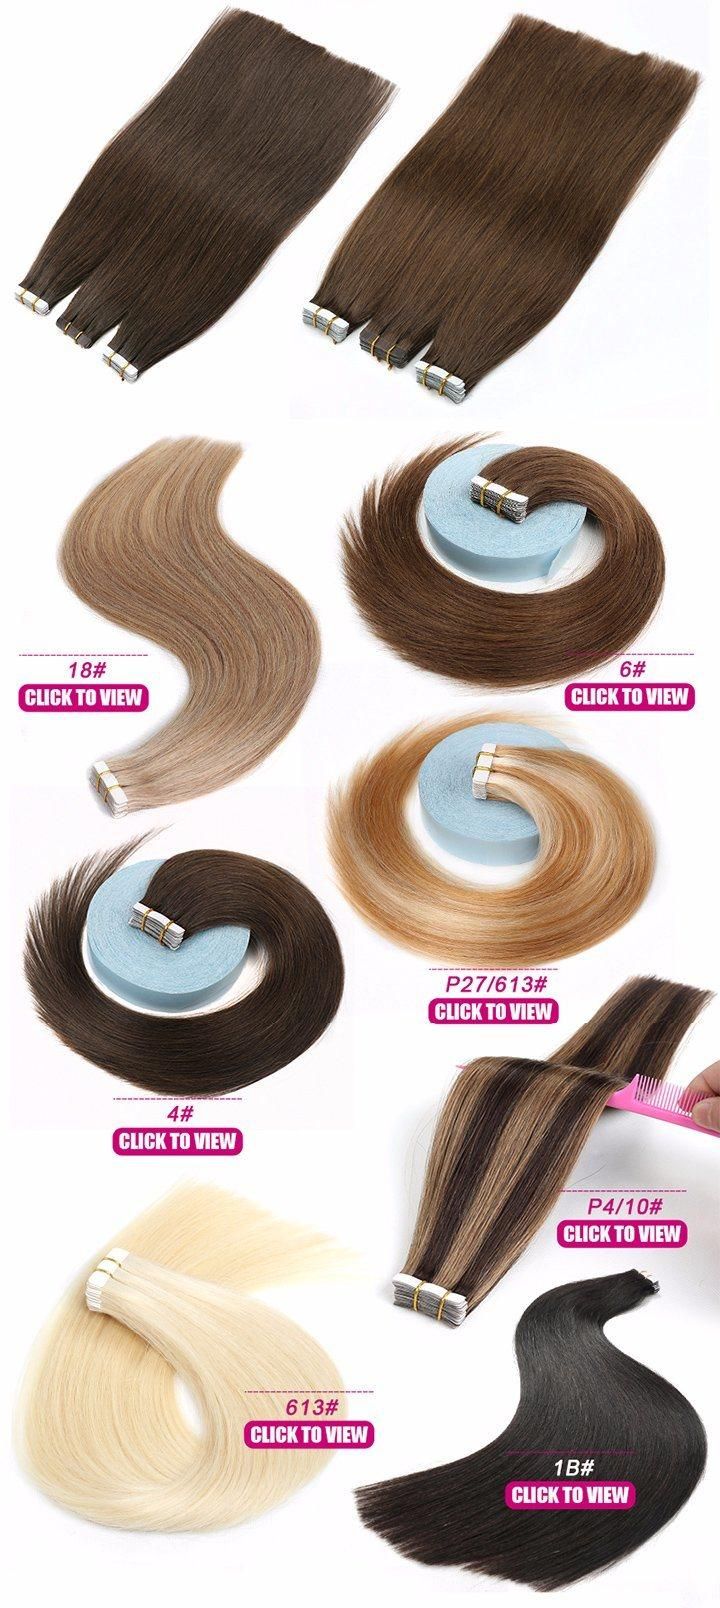 White Clip in Hair Extension